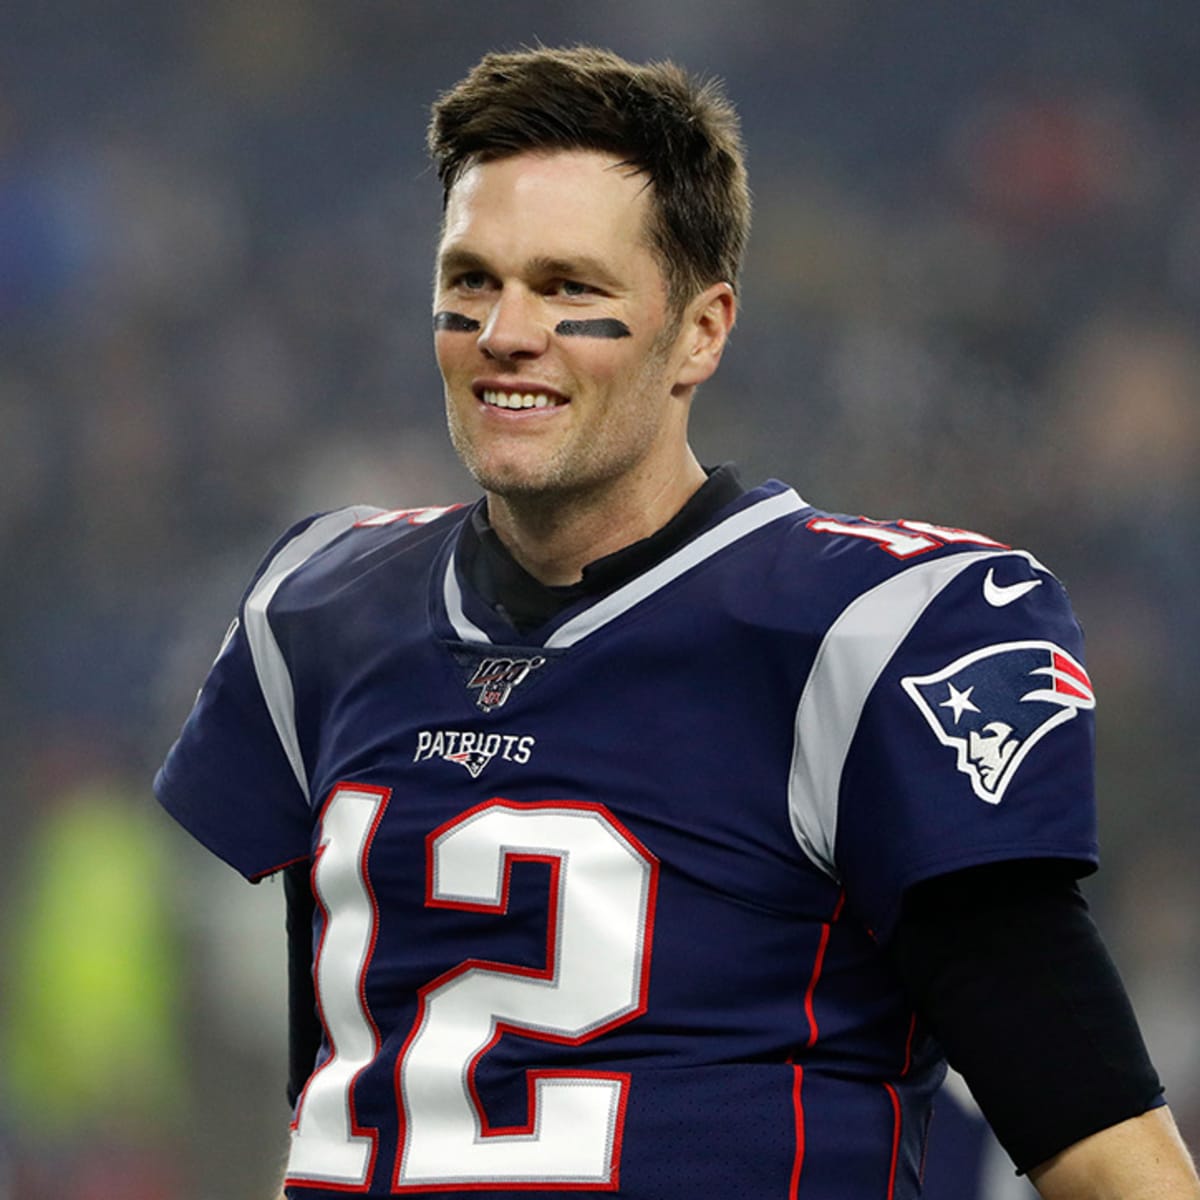 Tom Brady to wear No. 12 jersey with Buccaneers - Sports Illustrated